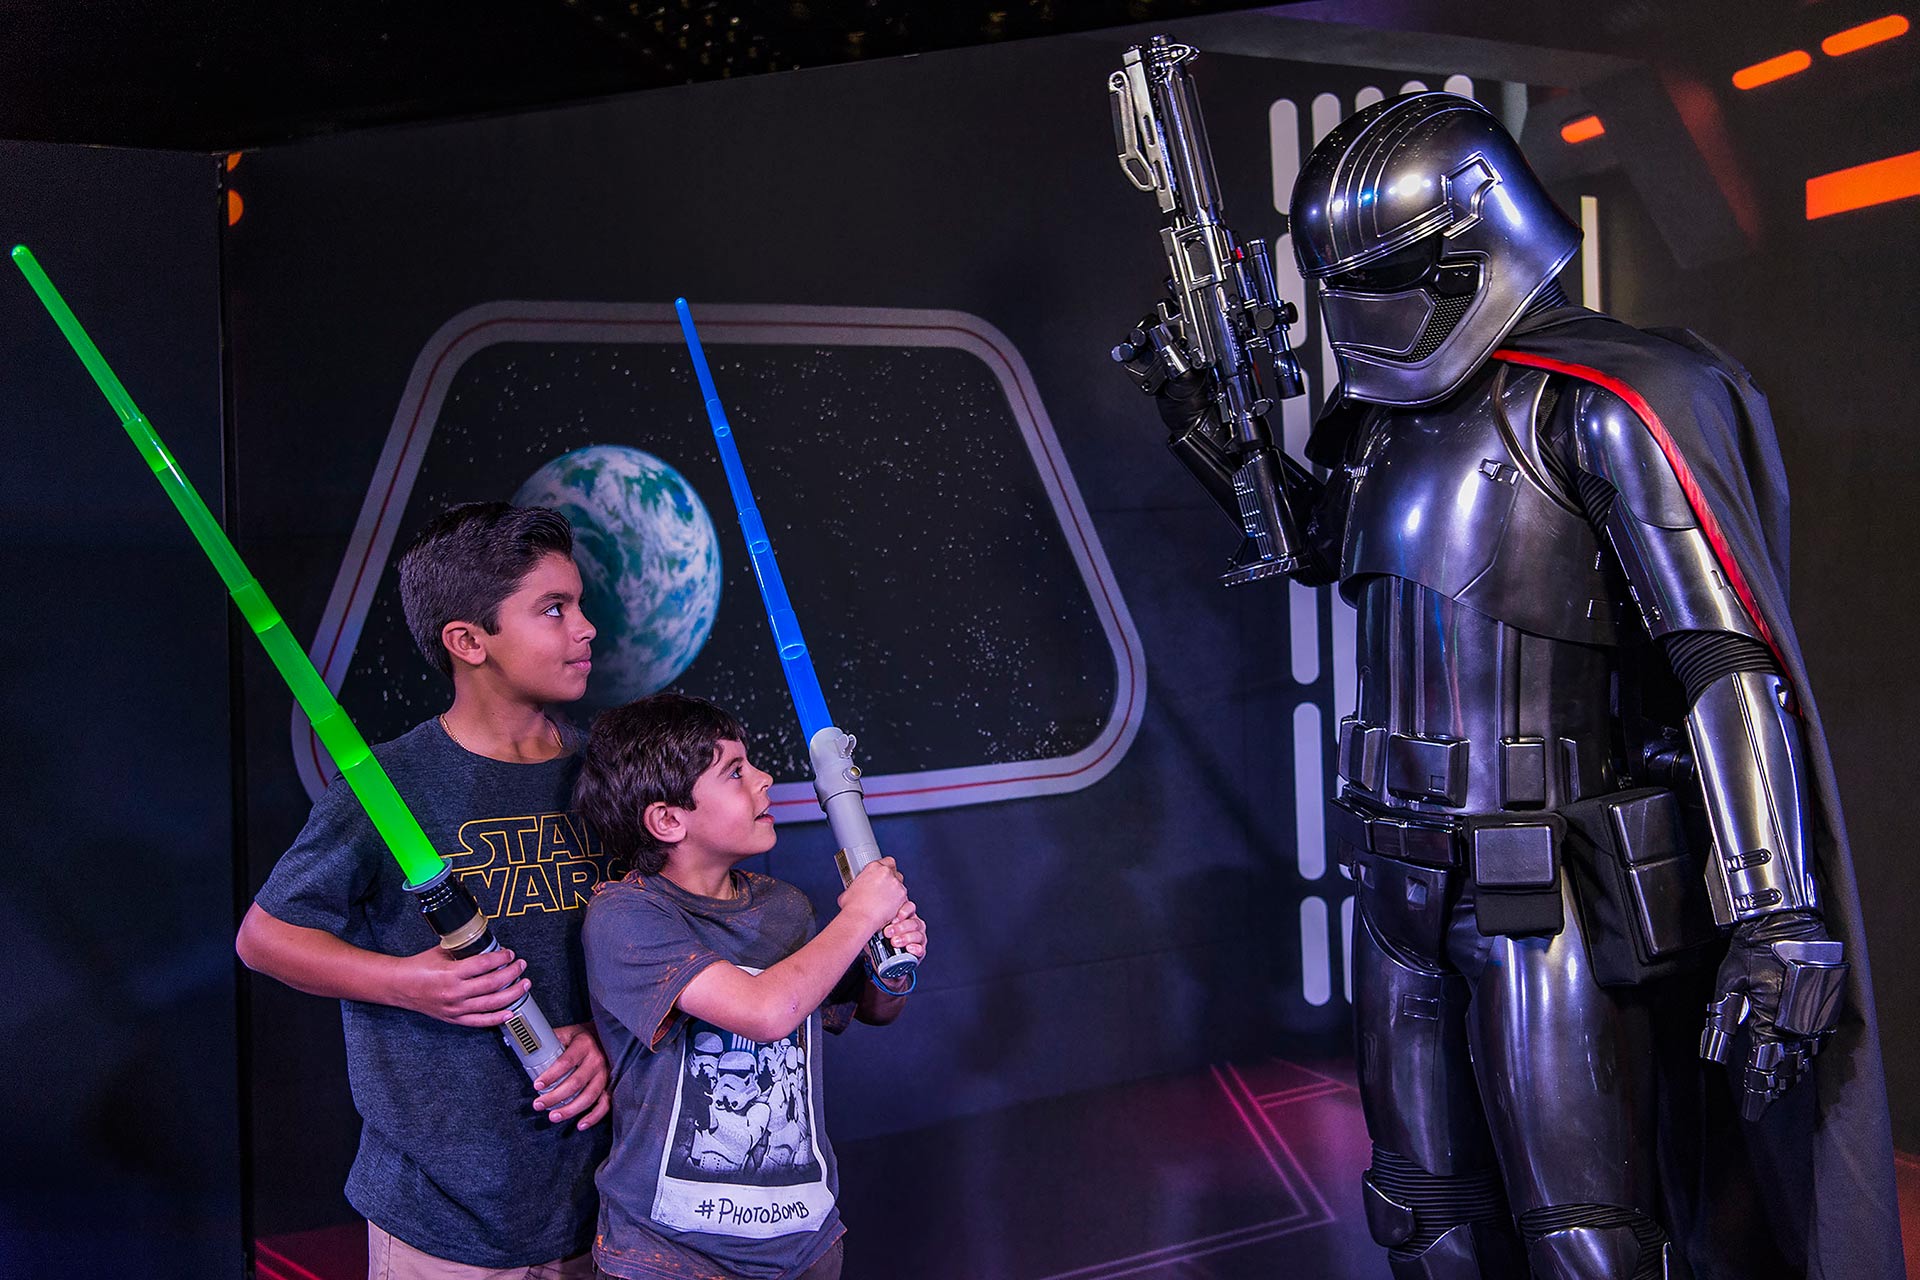 A little boy walking with Darth Vader and the Stormtroopers onboard the Disney Fantasy.